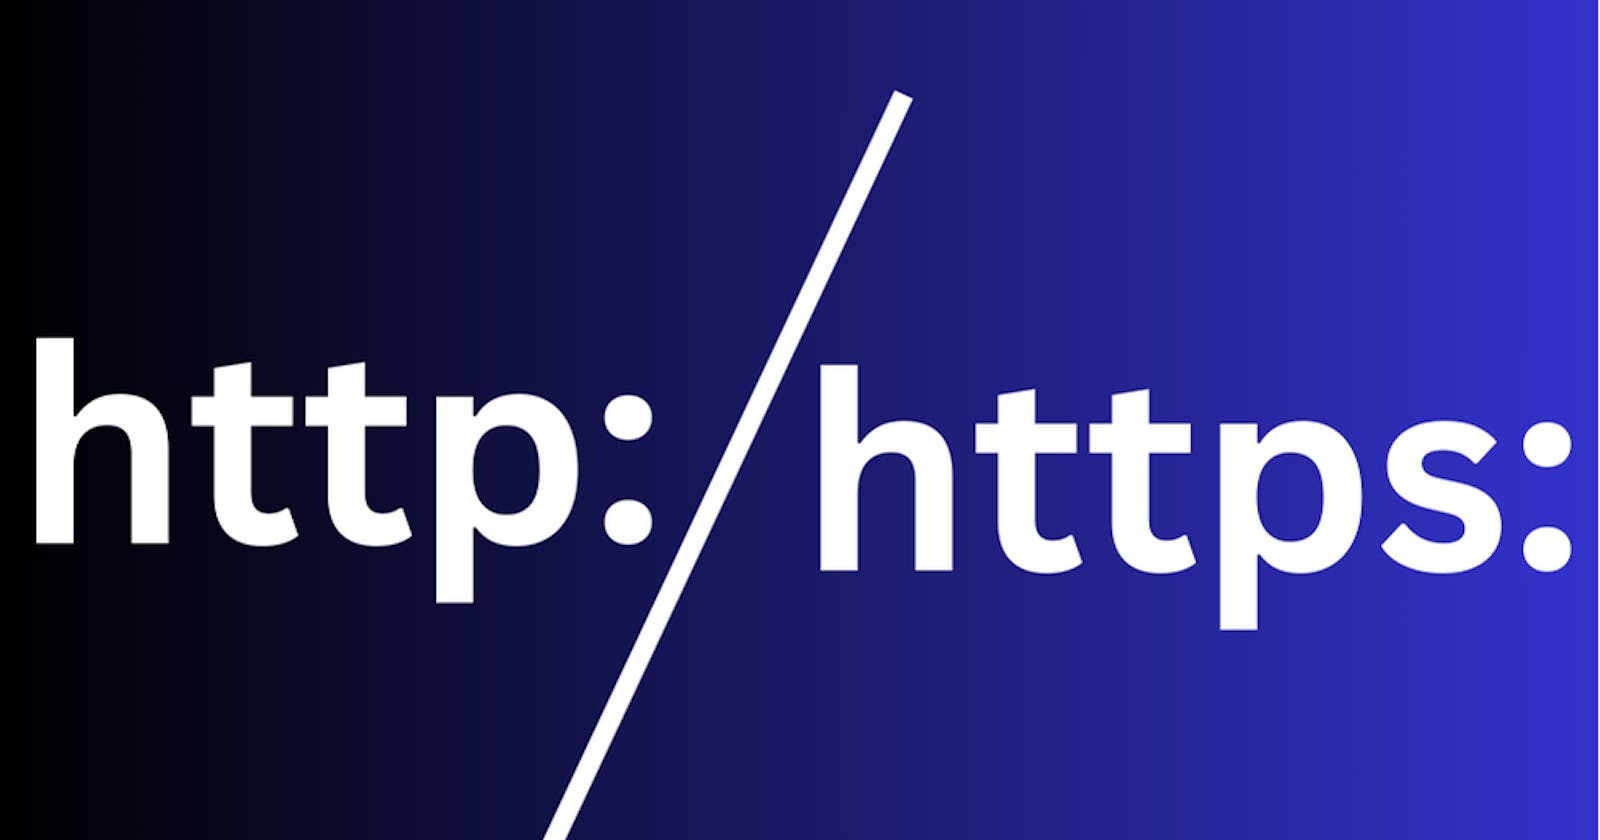 A short introduction to HTTP and HTTPS